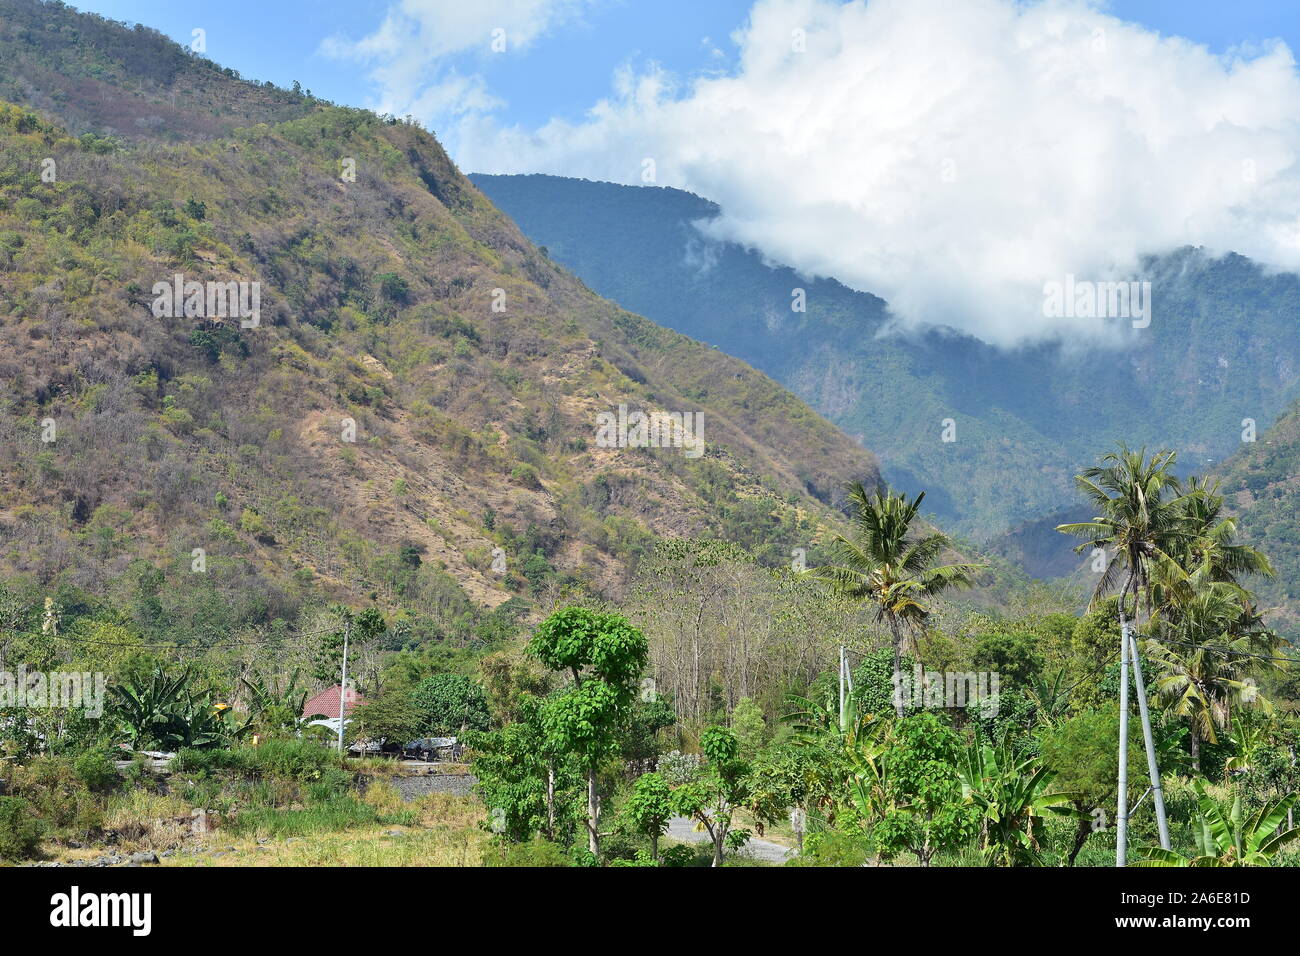 View of flat coastal areas with tropical flora in eastern Bali with volcanic hills in background. Stock Photo